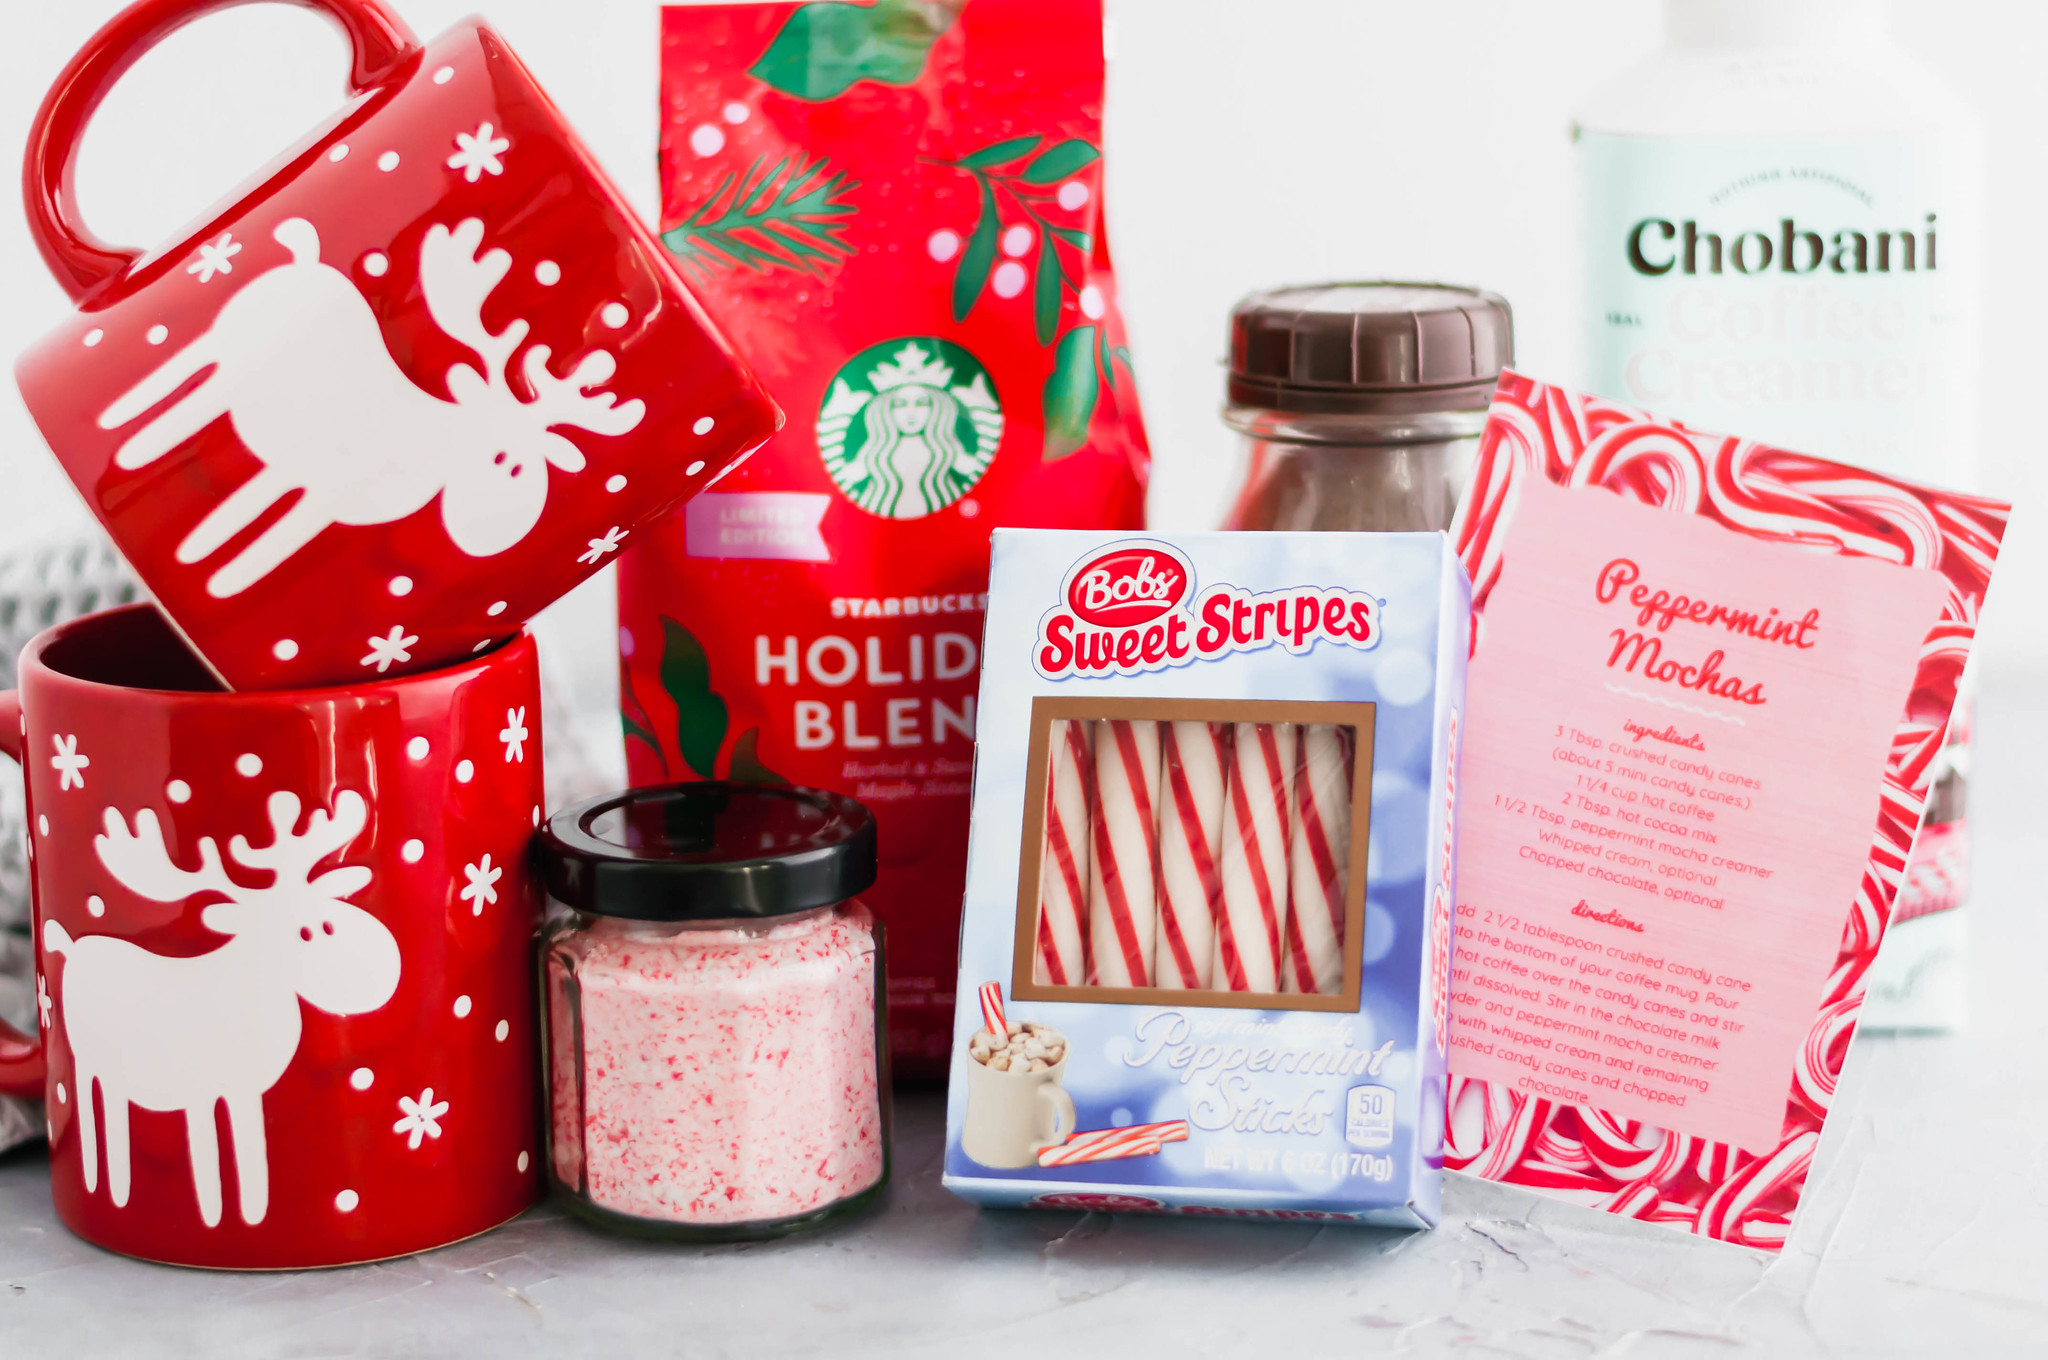 Looking for a fun, festive gift for a coffee lover in your life?! This Peppermint Mocha Kit is simple to put together and totally unique. All the ingredients required to make my delicious peppermint mochas in a fun tin or basket. Include the free printable recipe card so the recipient knows just how to make their delicious peppermint mocha at home.